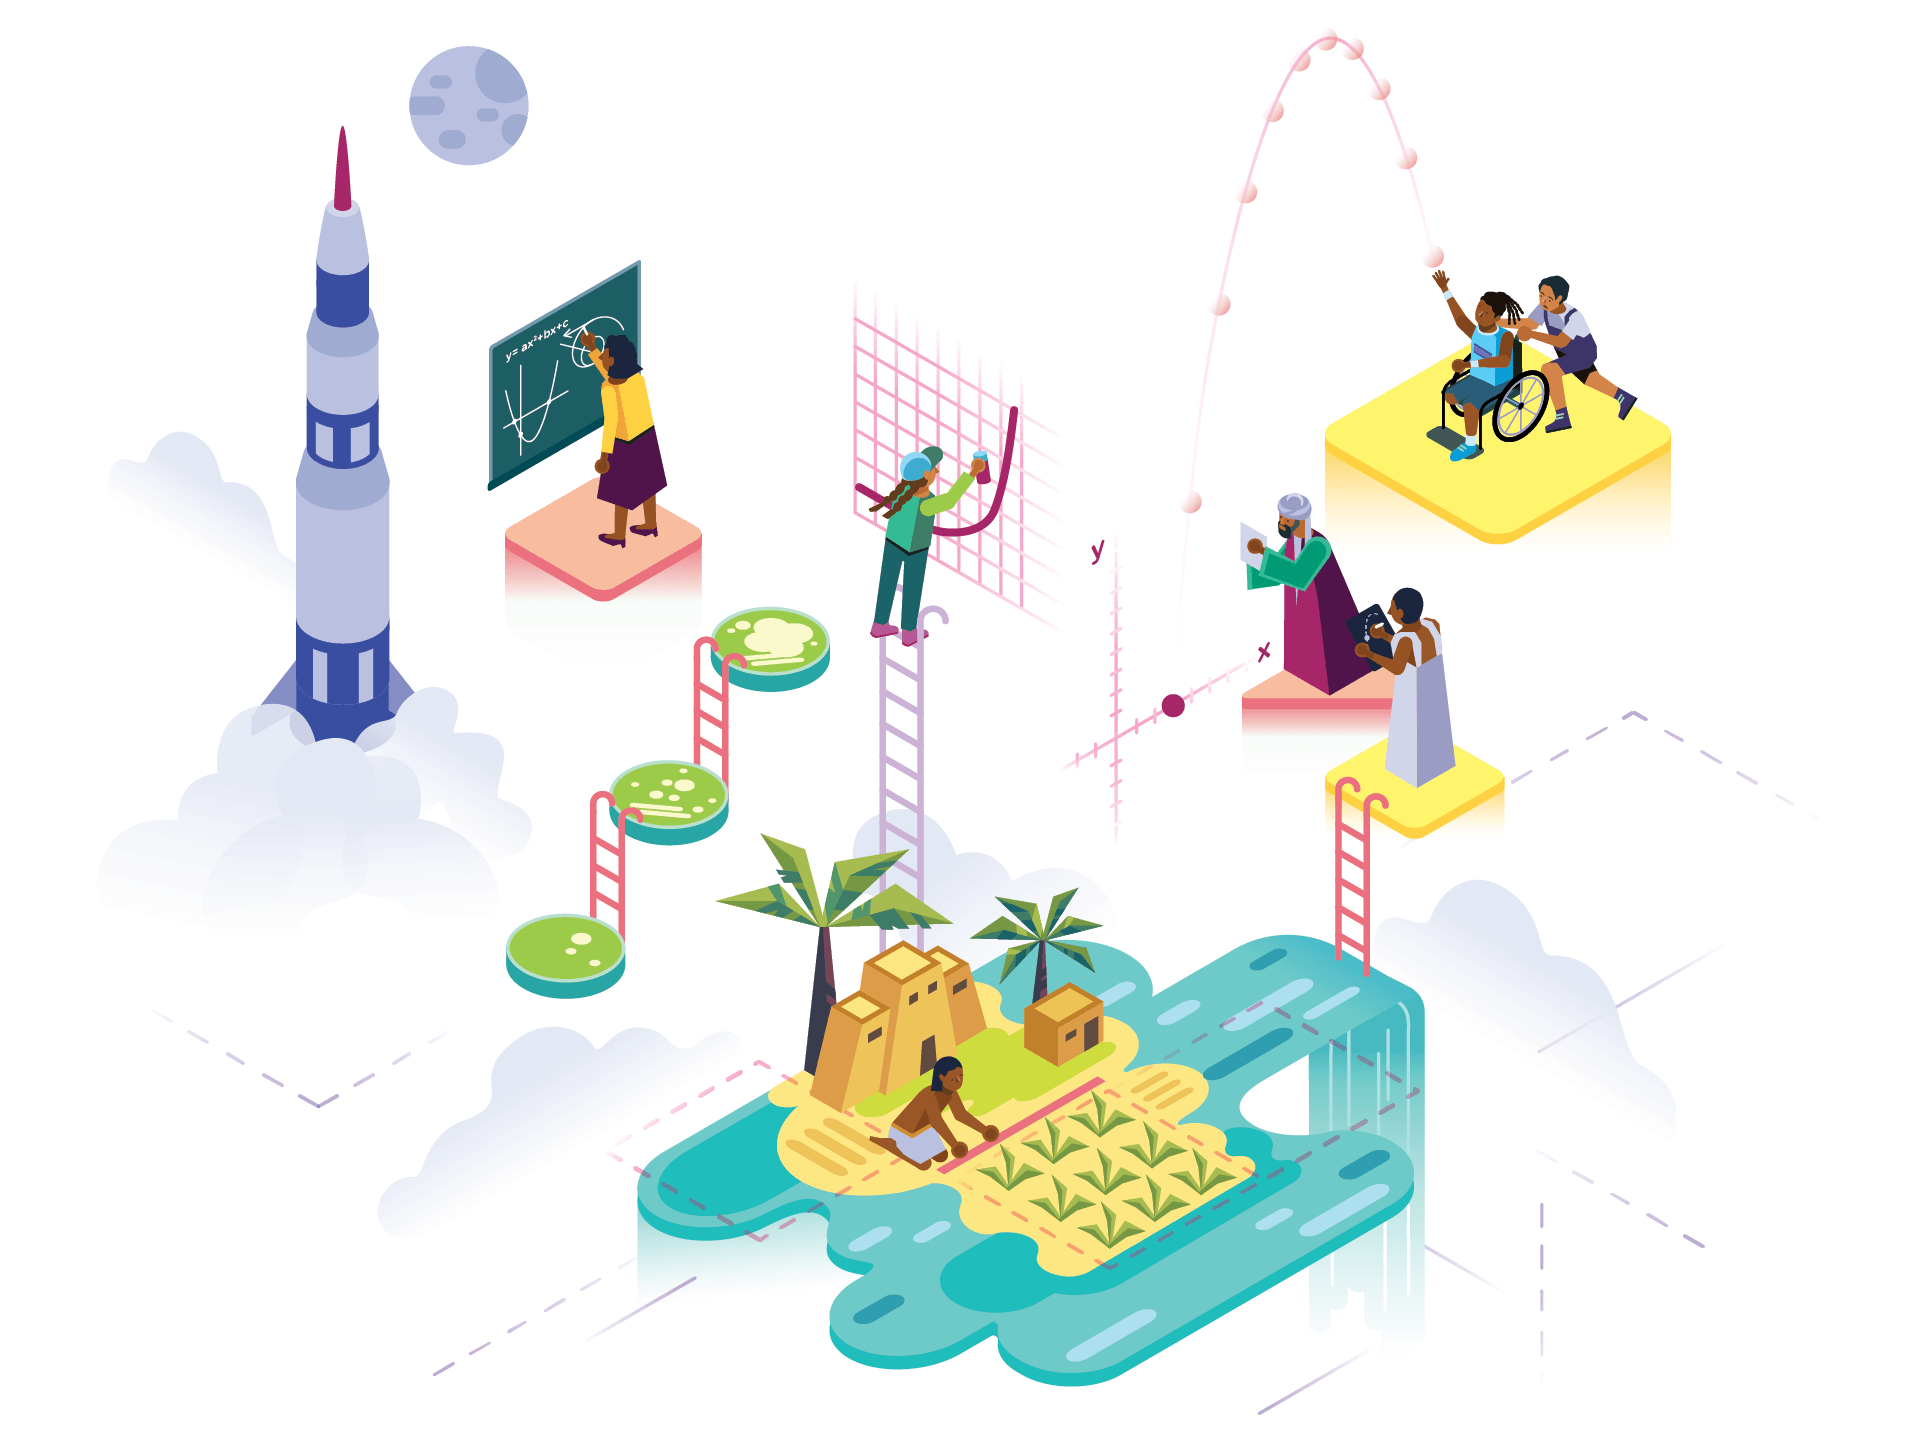 Isometric illustration depicting various educational and scientific activities, including a rocket launch, classroom teaching using Amplify curriculum, laboratory experiments, agricultural research, and bridge construction.